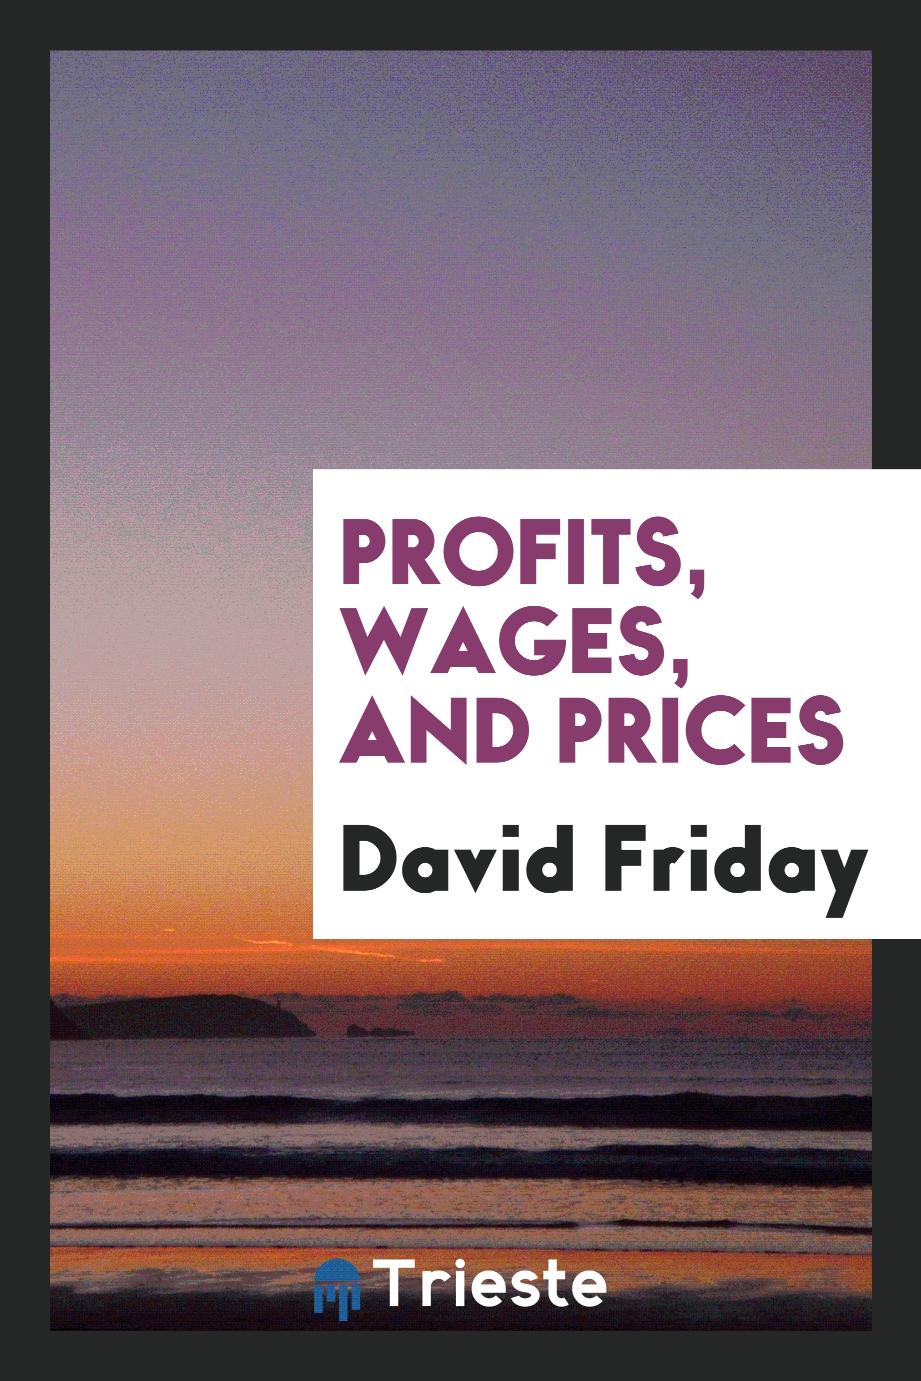 David Friday - Profits, wages, and prices